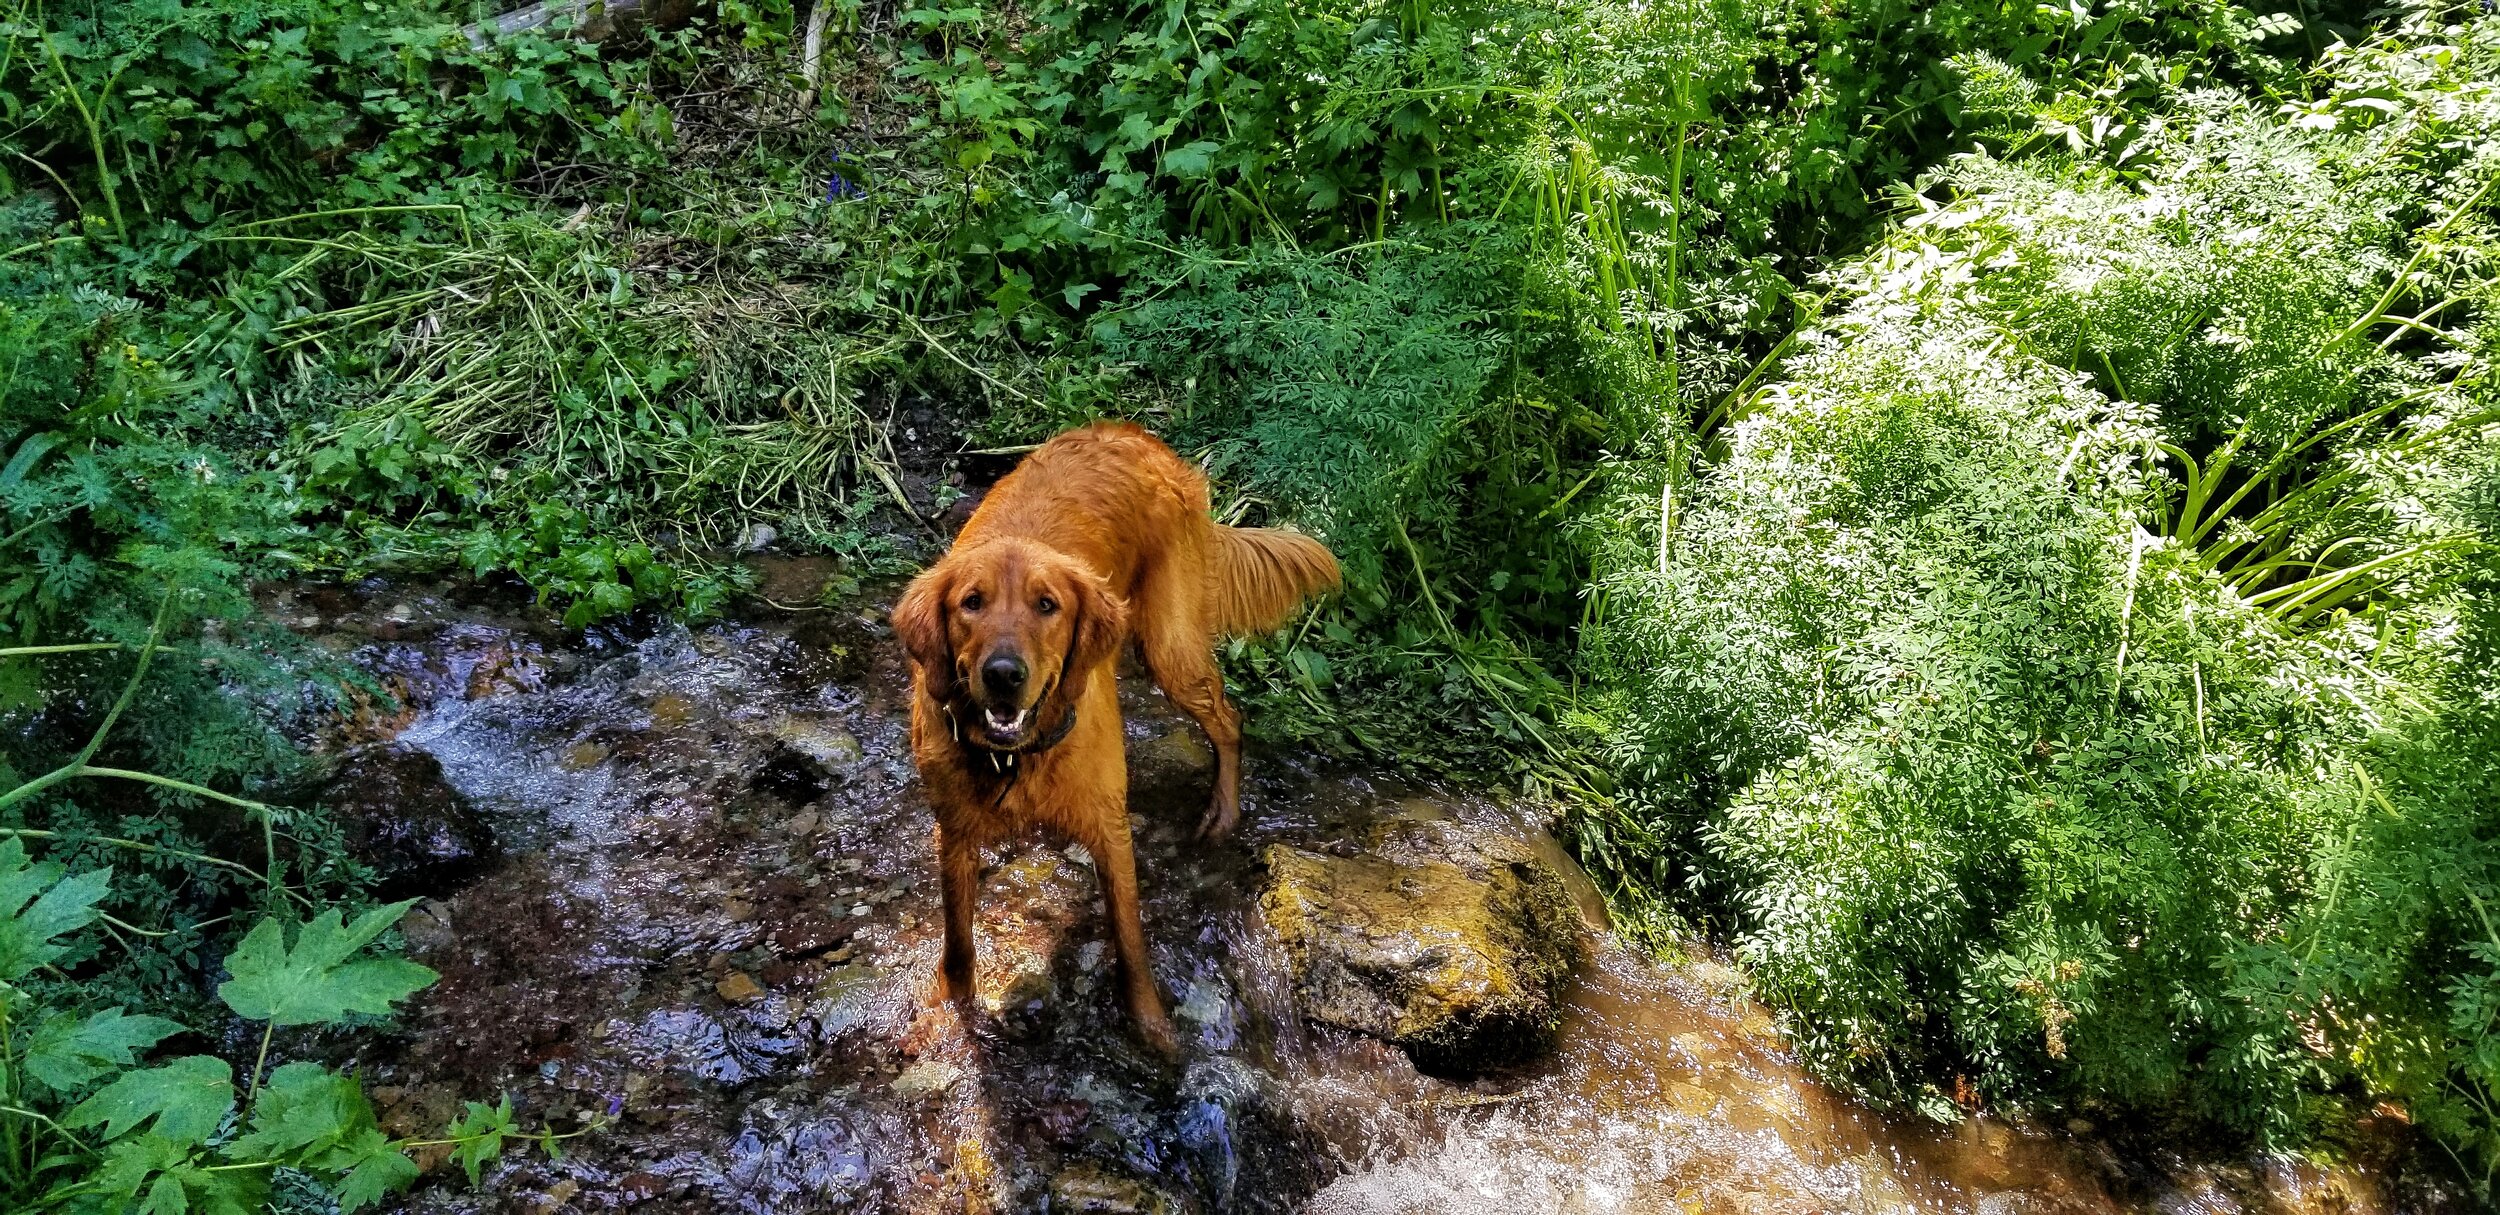 A golden retriever stands in a creek surrounded by lush greenery and looks up at the camera